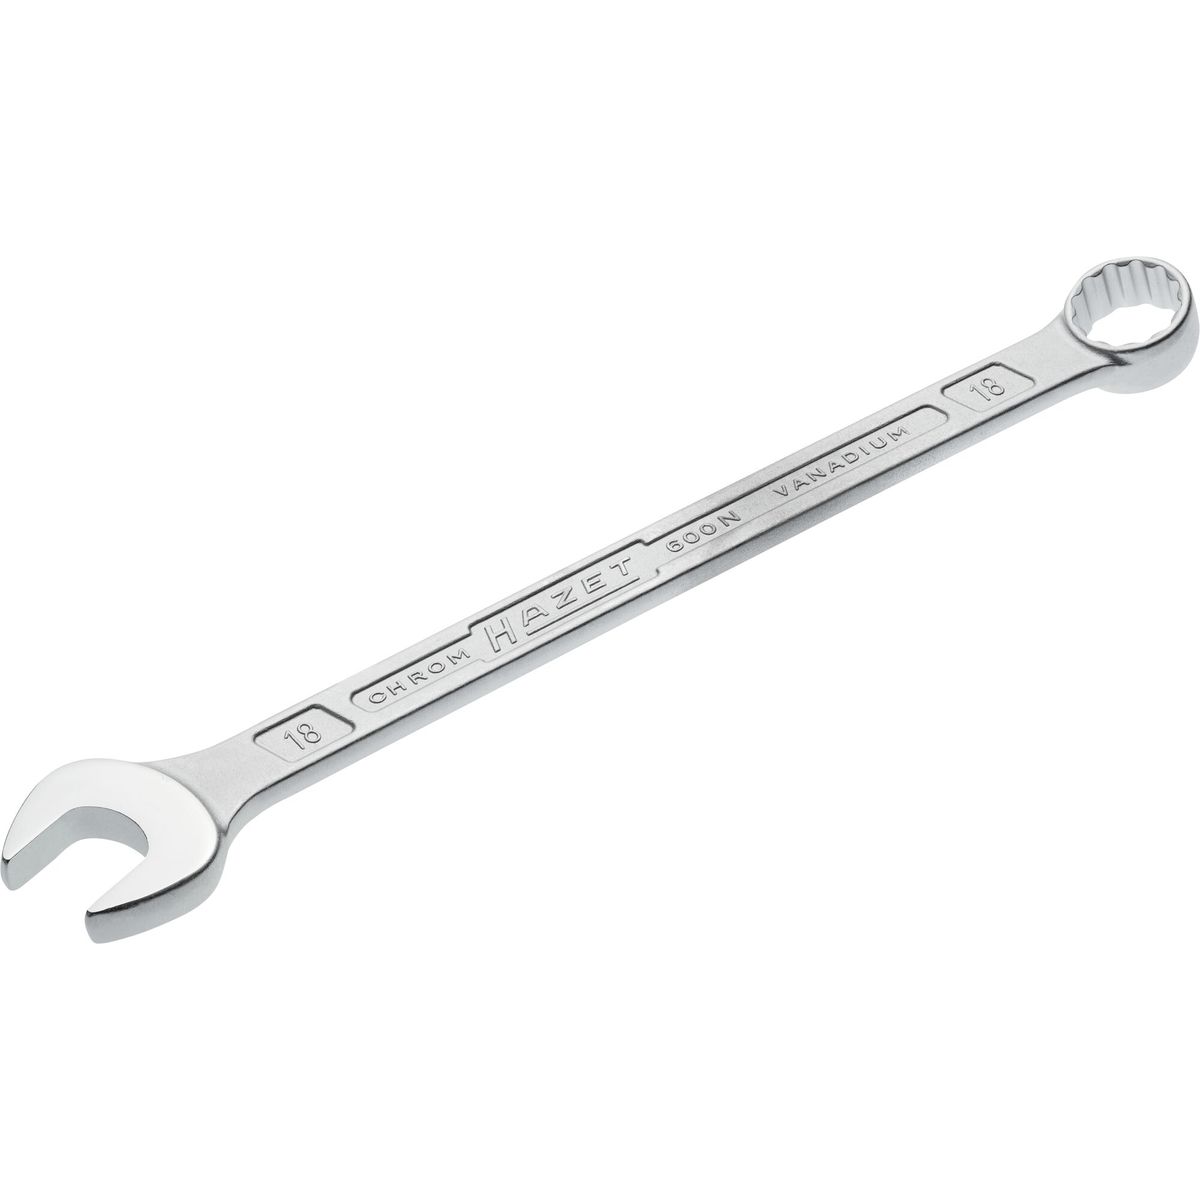 Combination Wrench No.600N-18 Hazet®